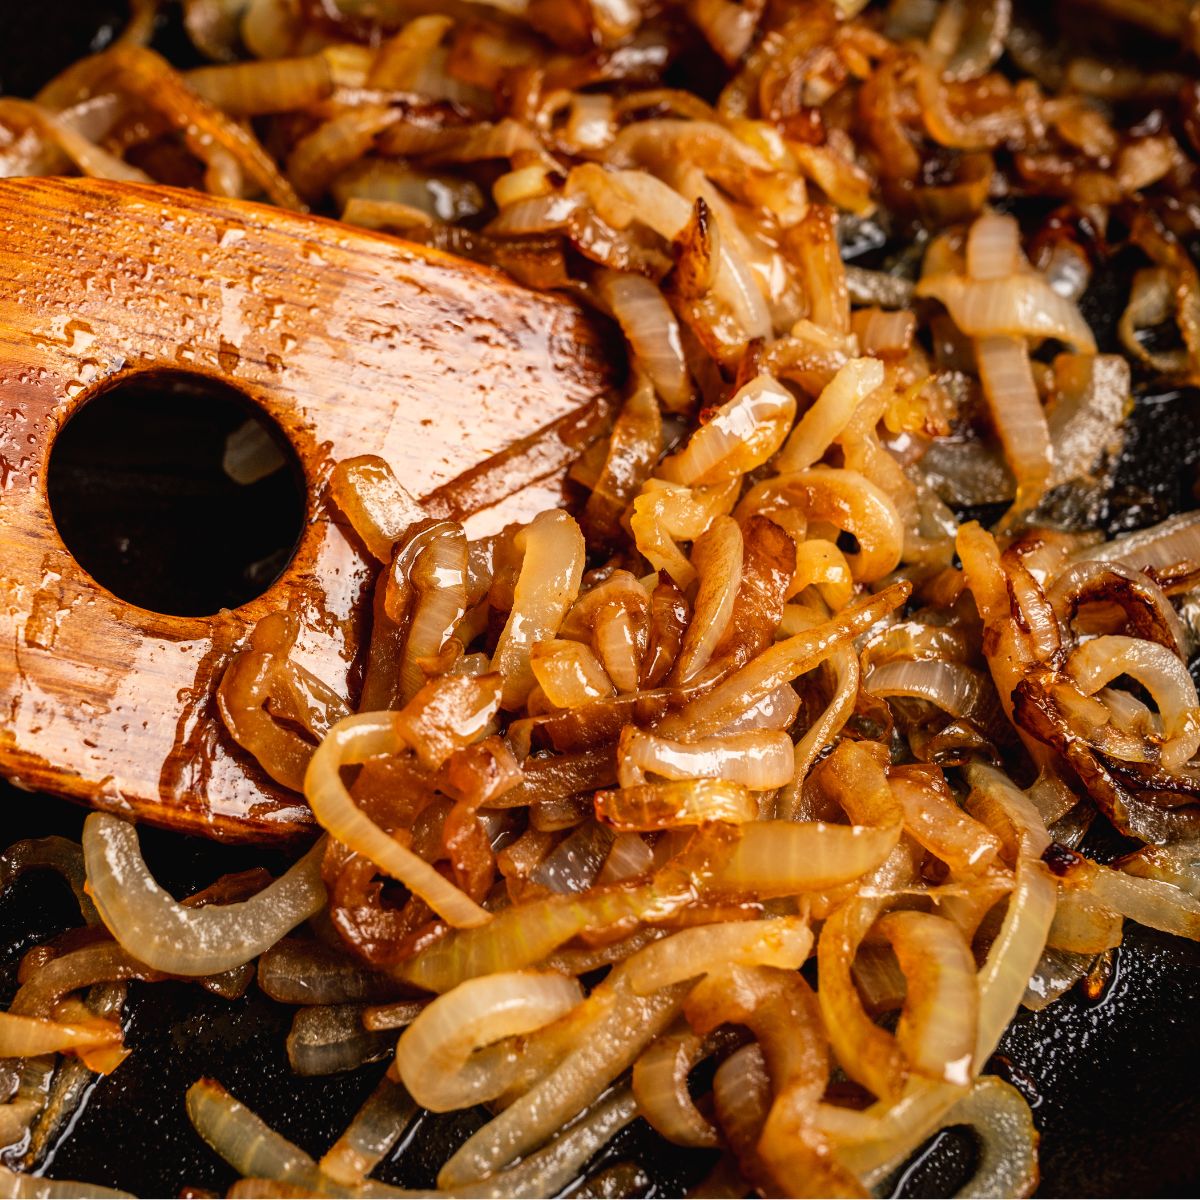 Skillet with caramelized onions.